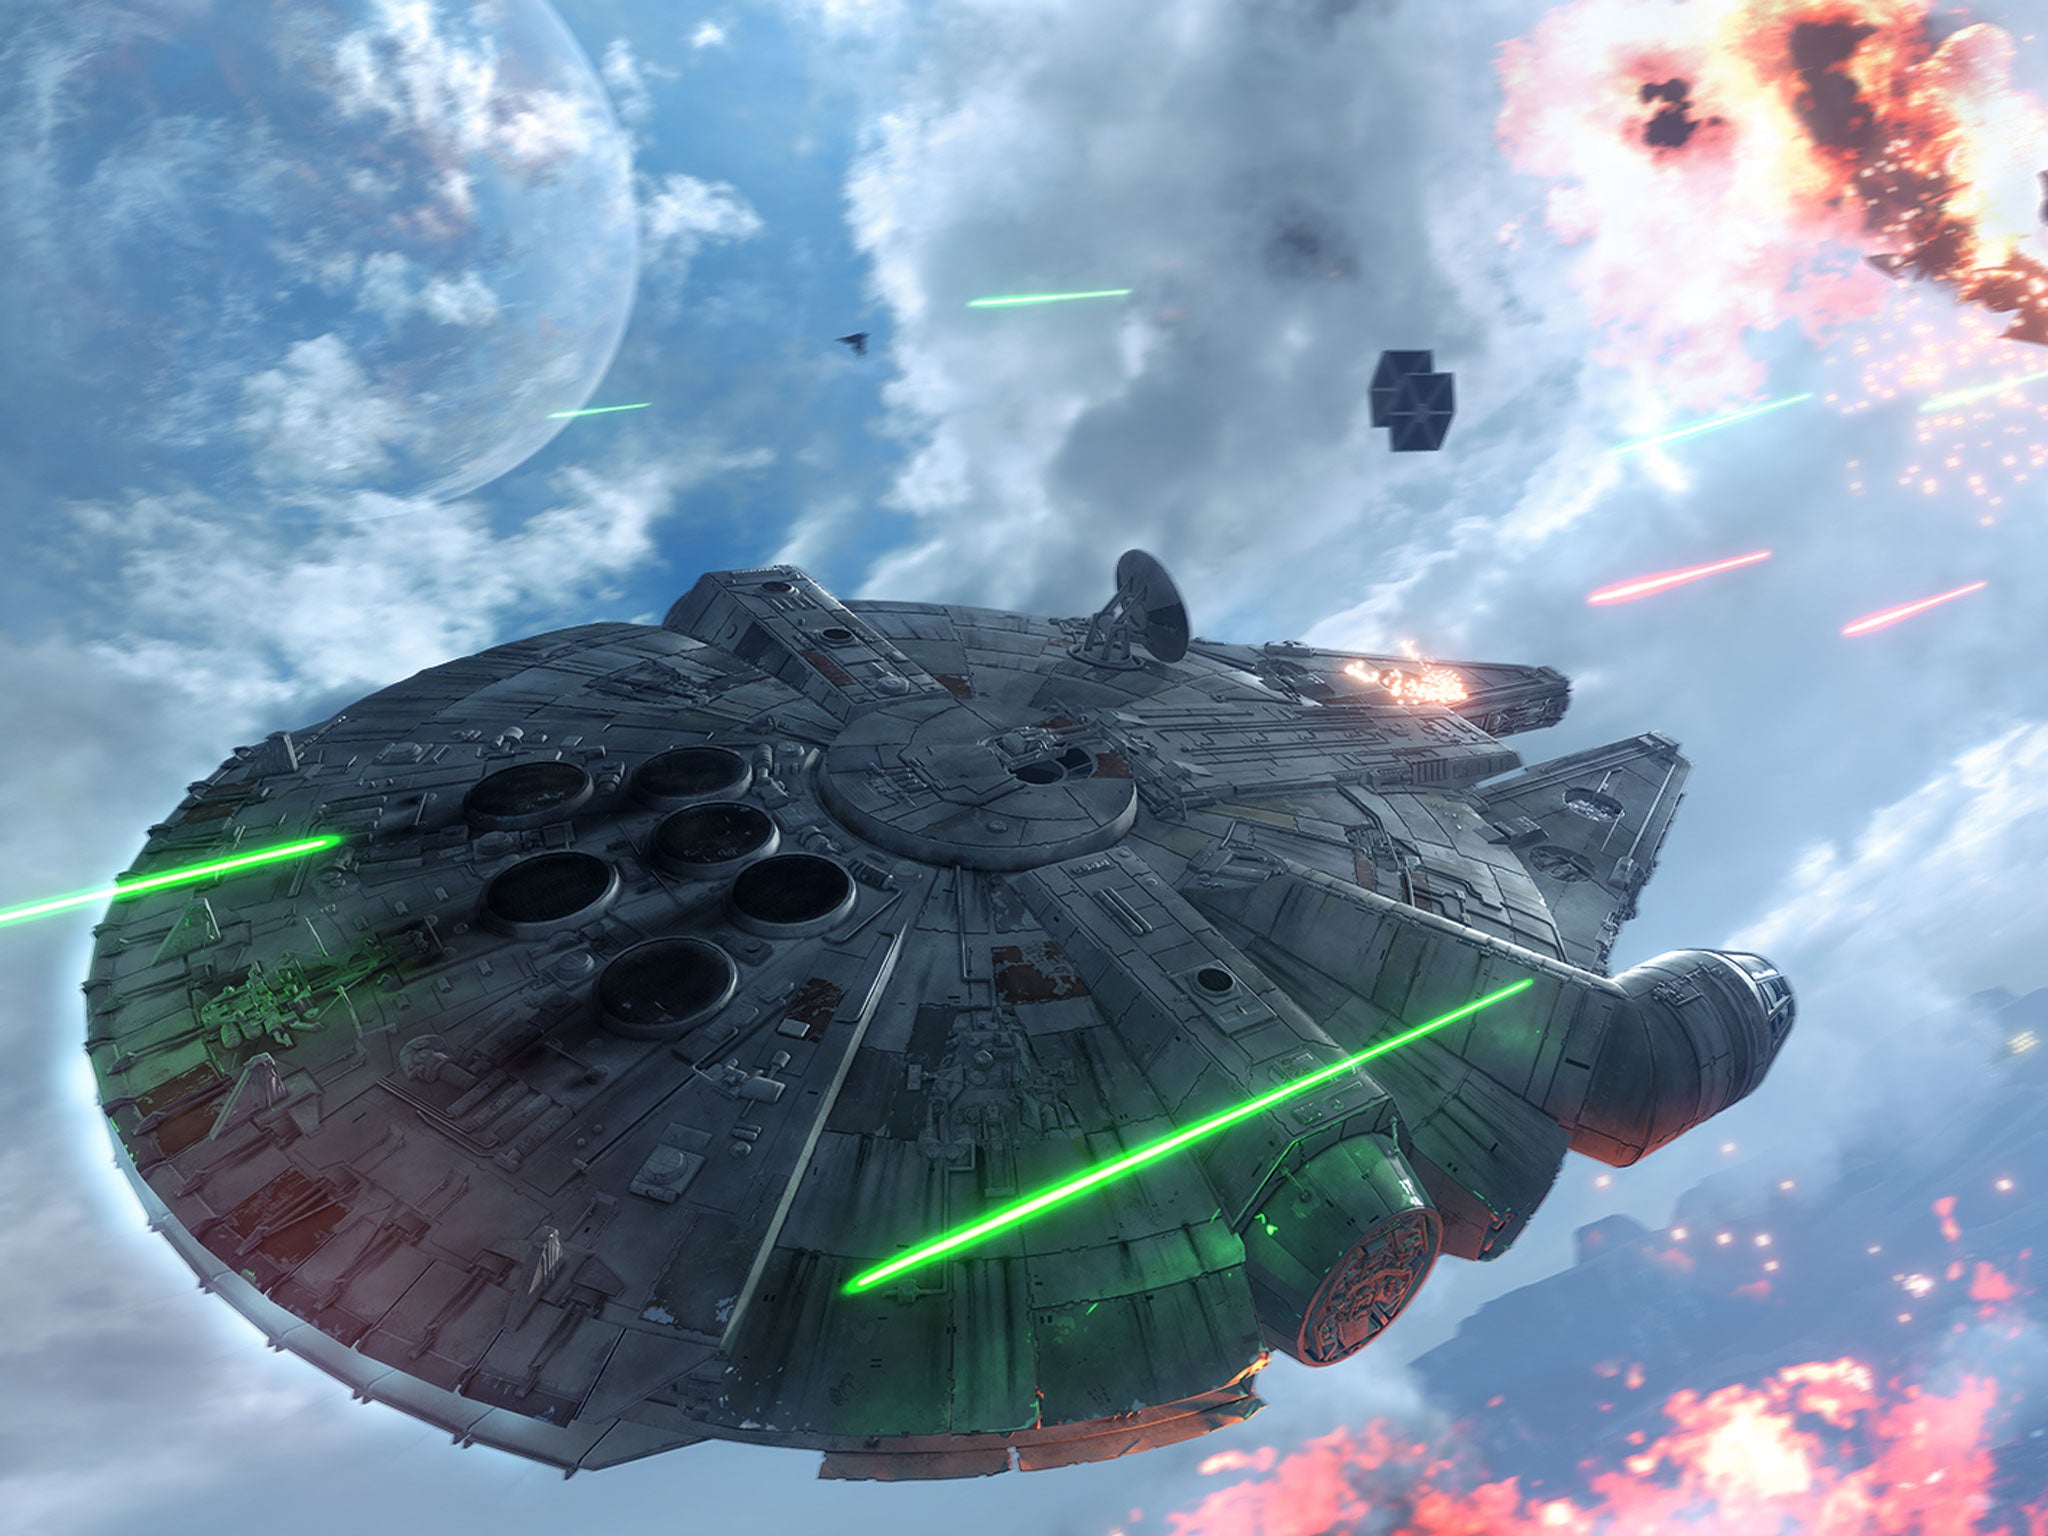 Star Wars Battlefront can feel more like a stylised map pack for a shooter rather than its own game